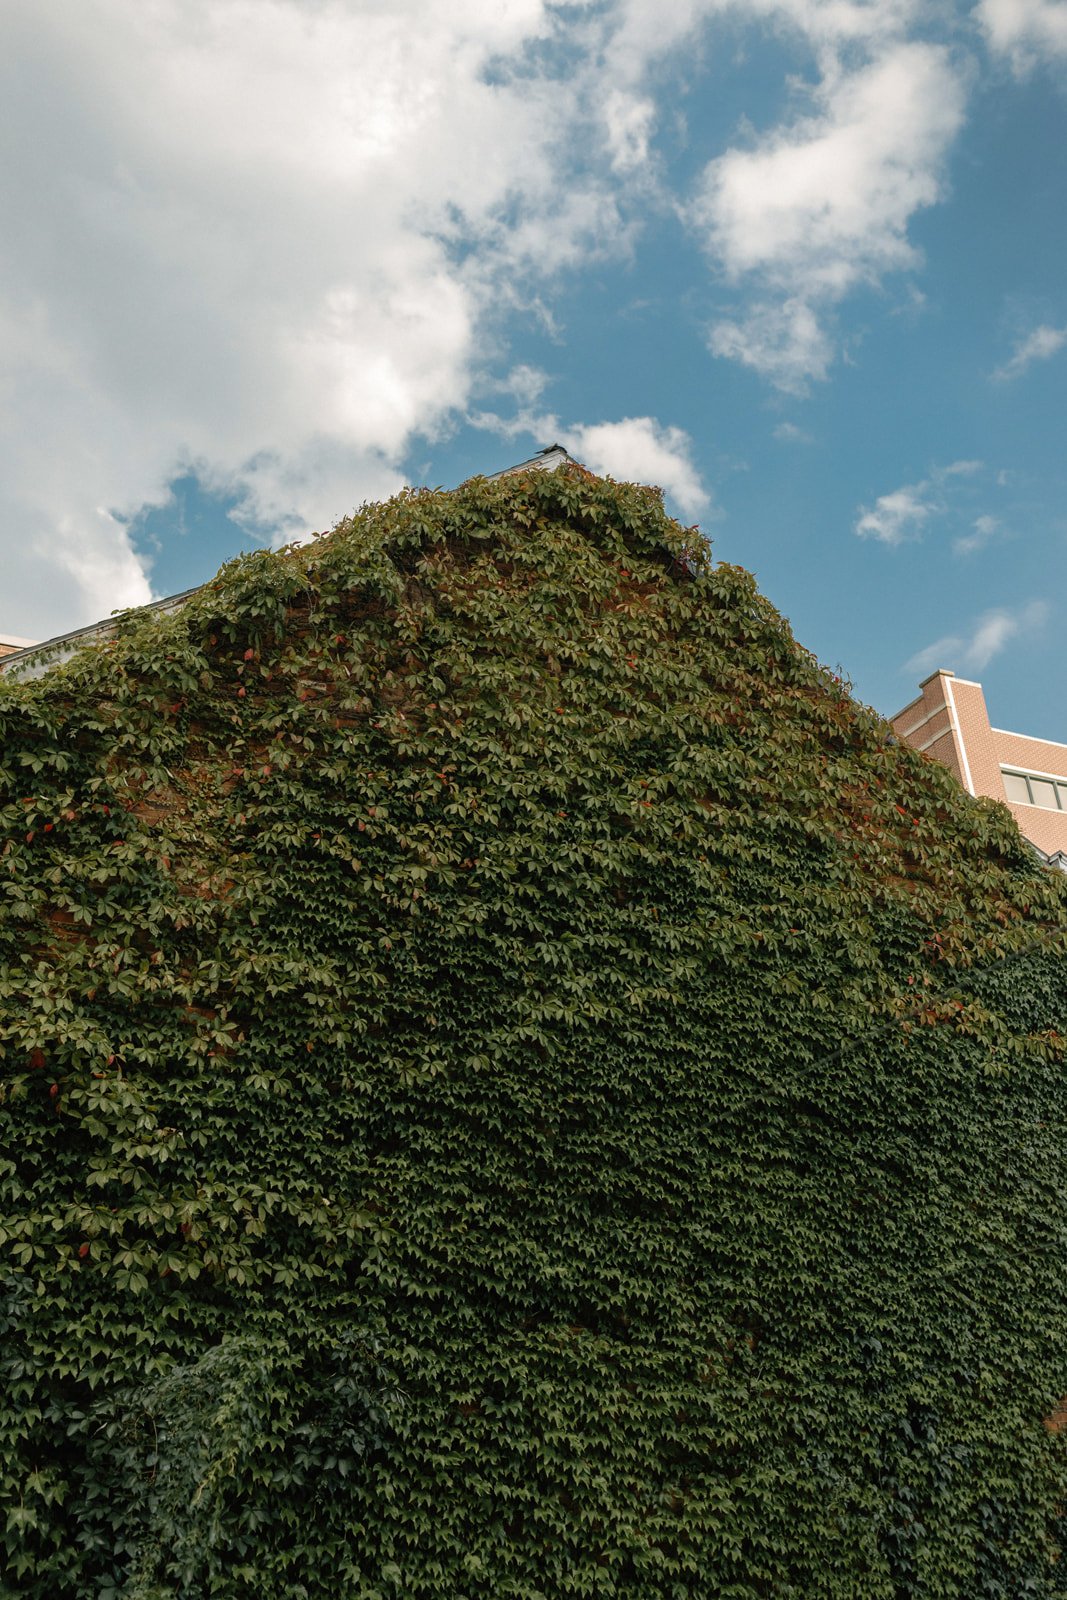 Ivy covered wall reaching towards a blue sky